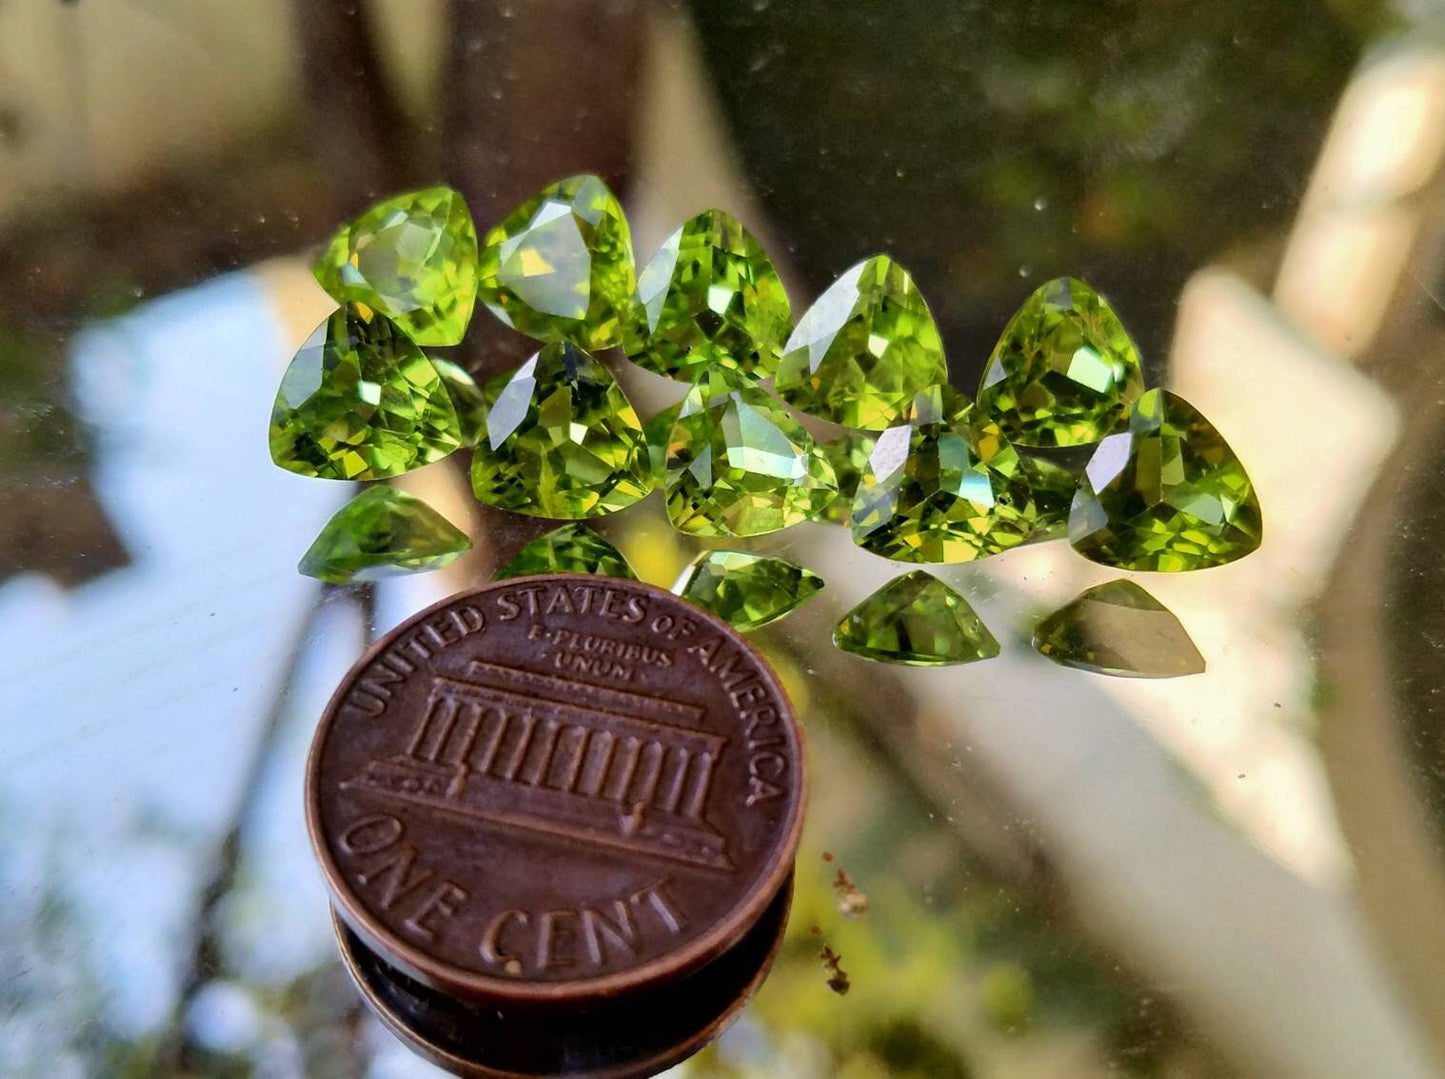 ARSAA GEMS AND MINERALSNatural top quality faceted beautiful trillion shape calibrated green peridot gems - Premium  from ARSAA GEMS AND MINERALS - Just $160.00! Shop now at ARSAA GEMS AND MINERALS